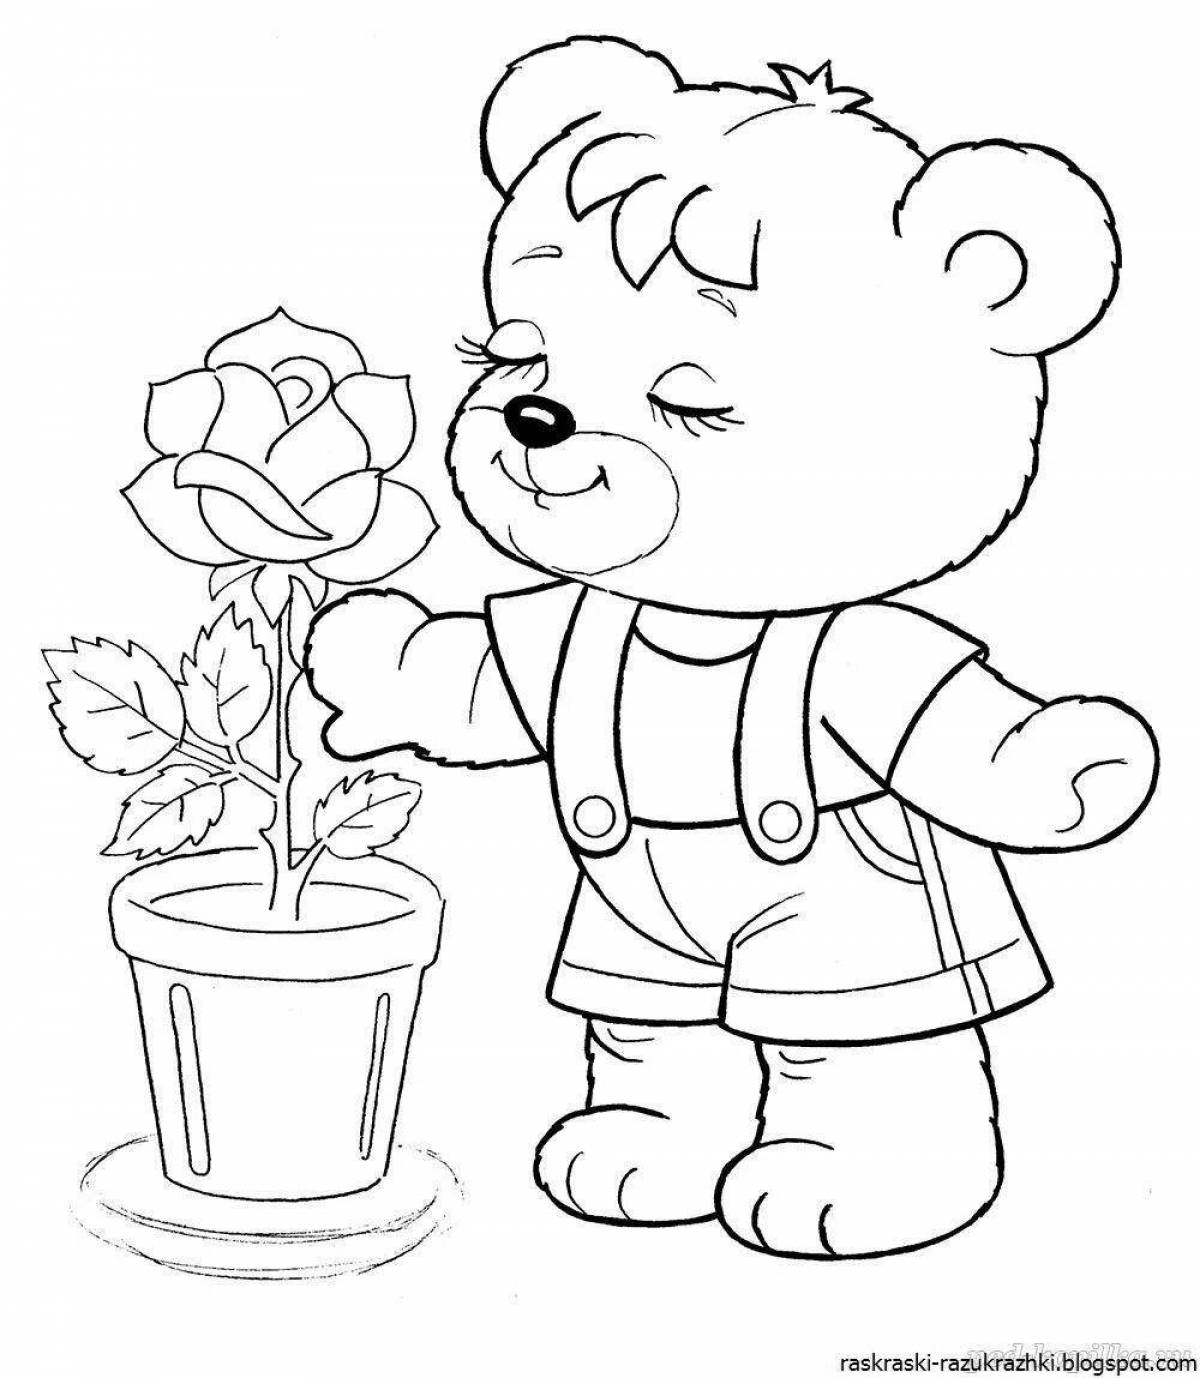 Adorable bear coloring book for children 5-6 years old